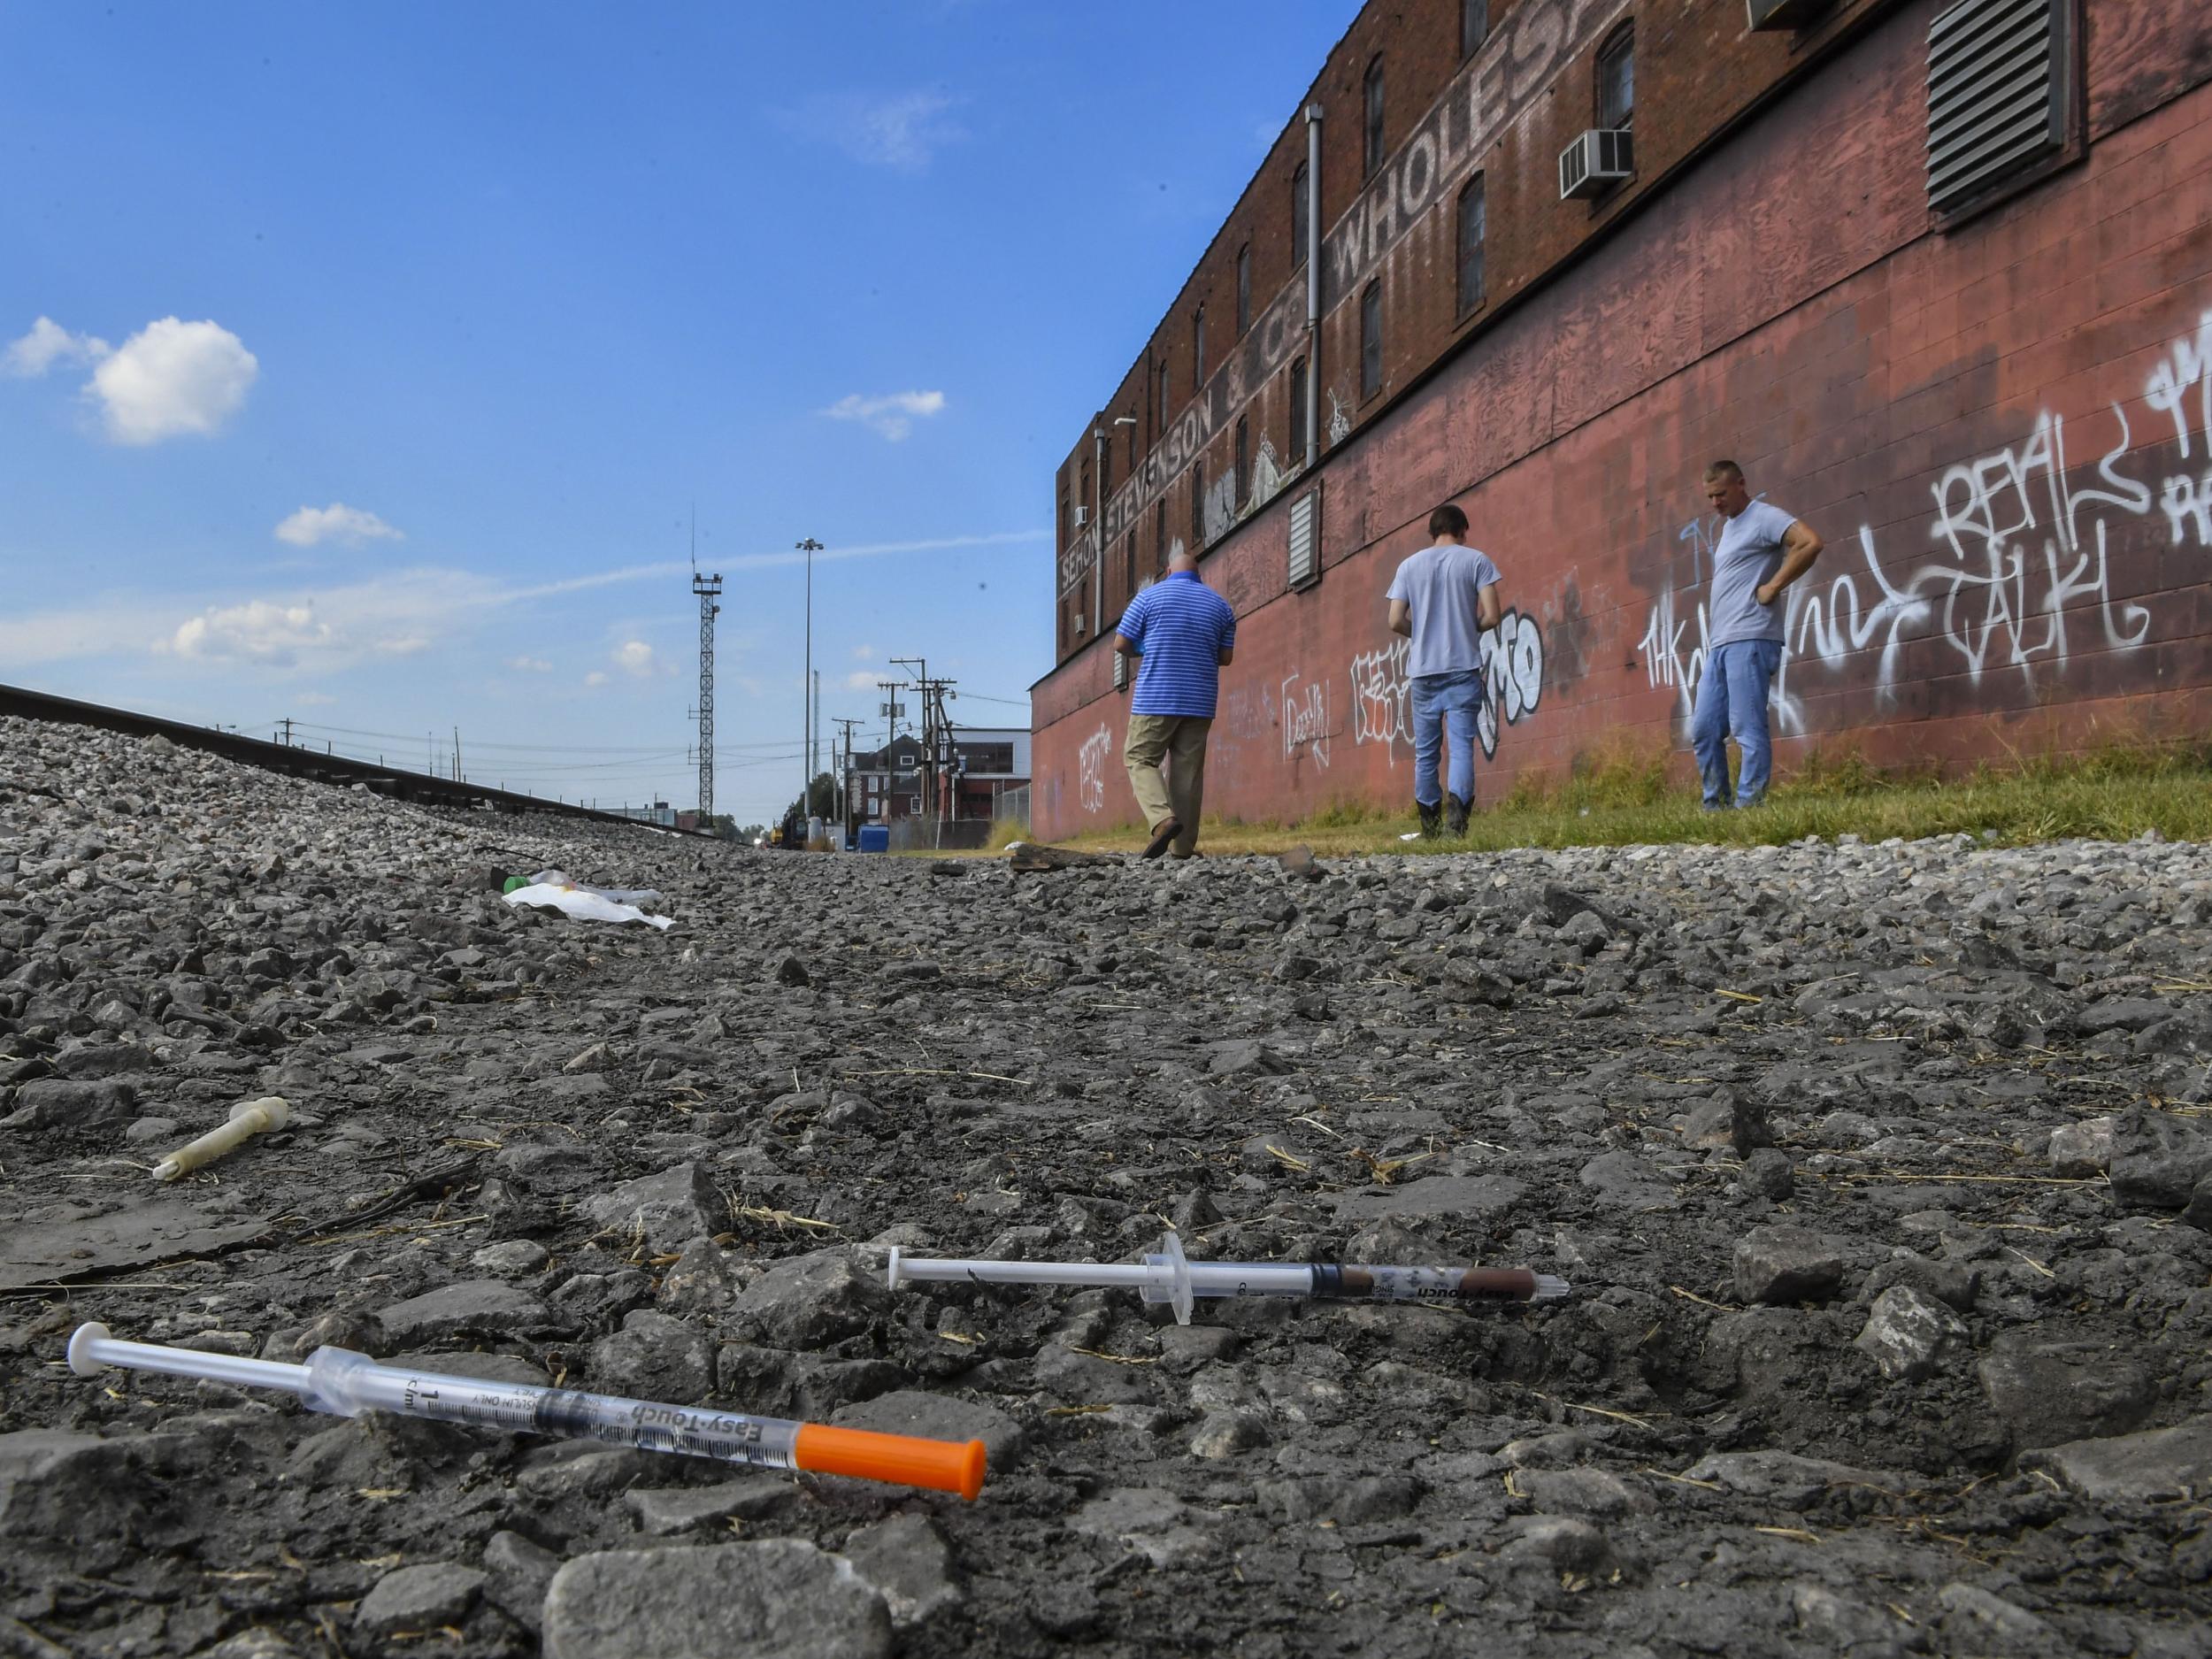 Addicts would search for discarded dirty needles and use them out of desperation